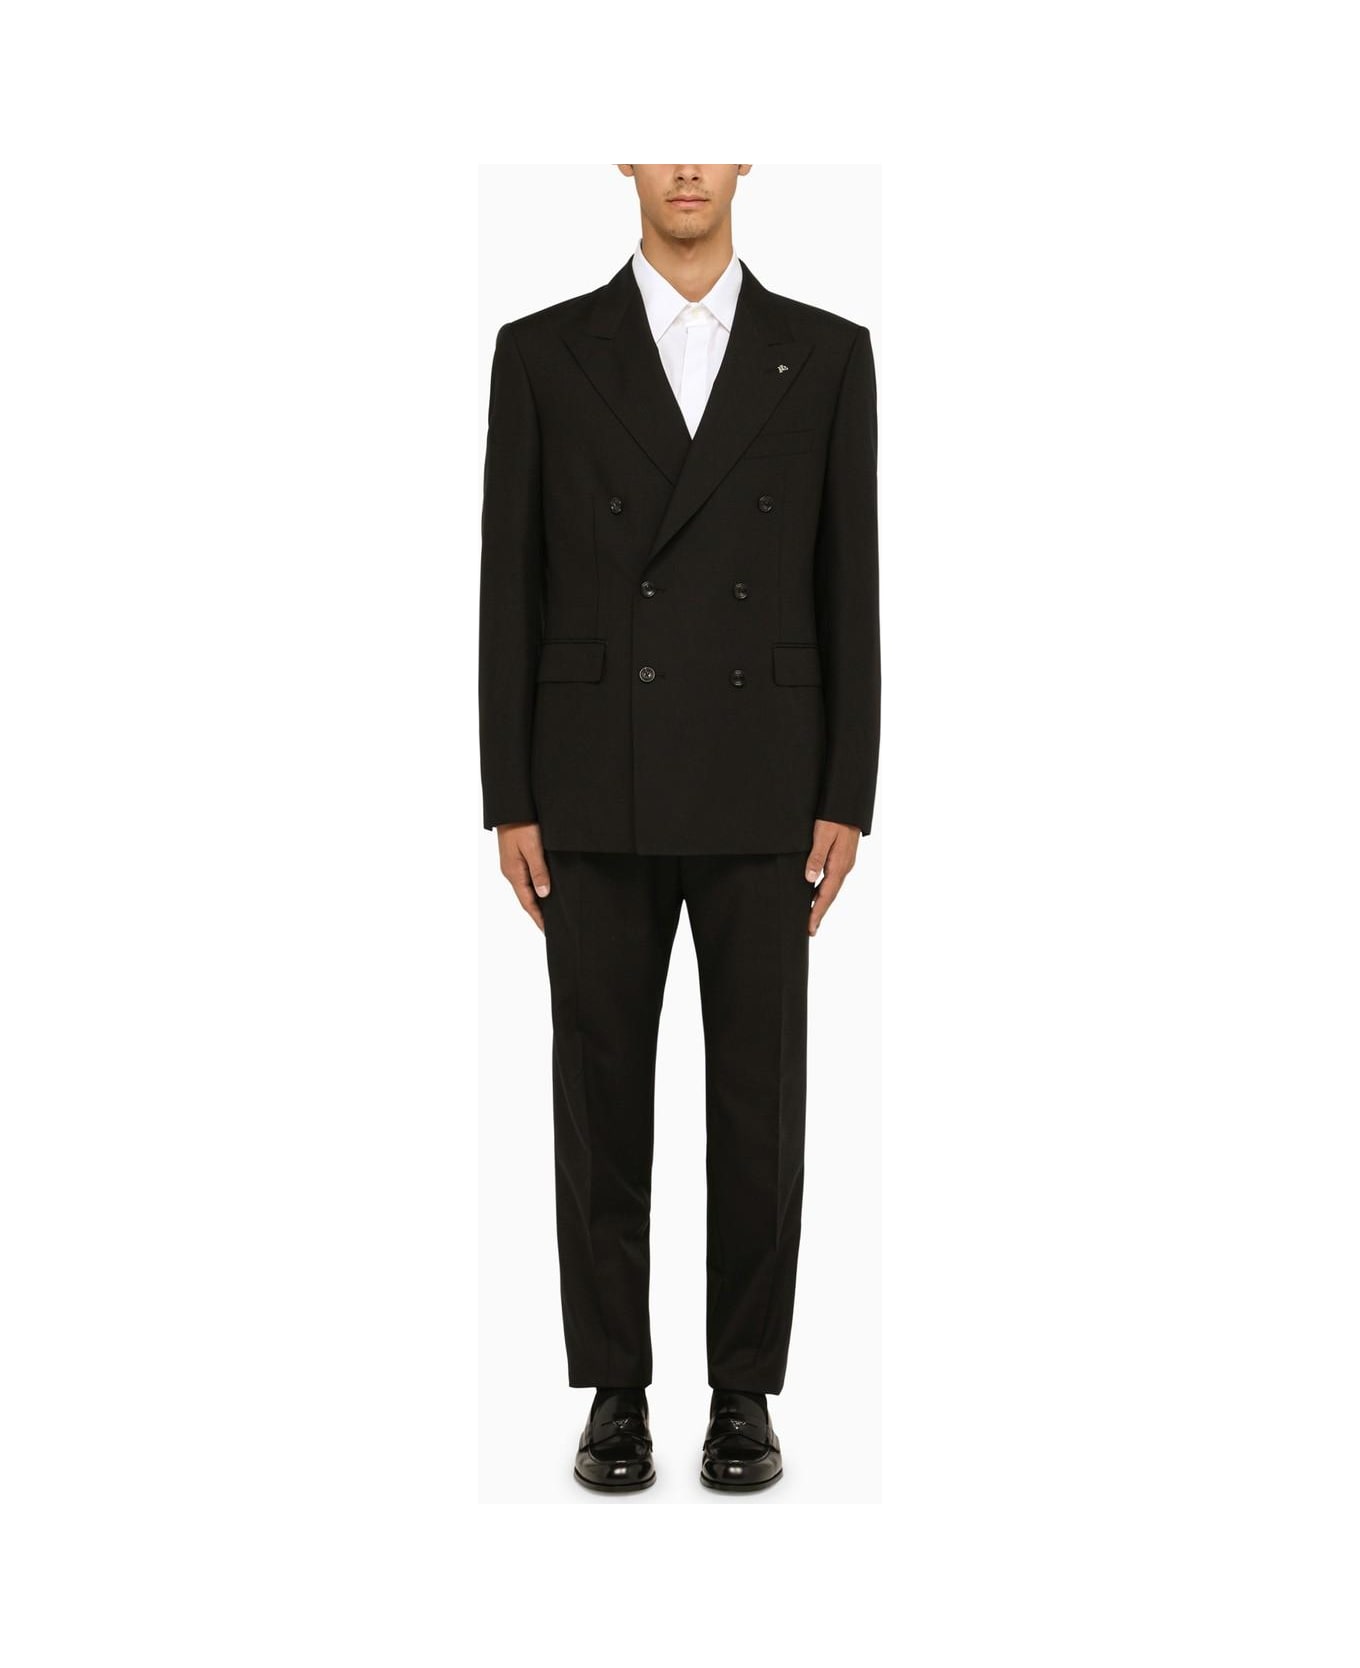 Tagliatore Black Double-breasted Suit In Wool - Nero スーツ